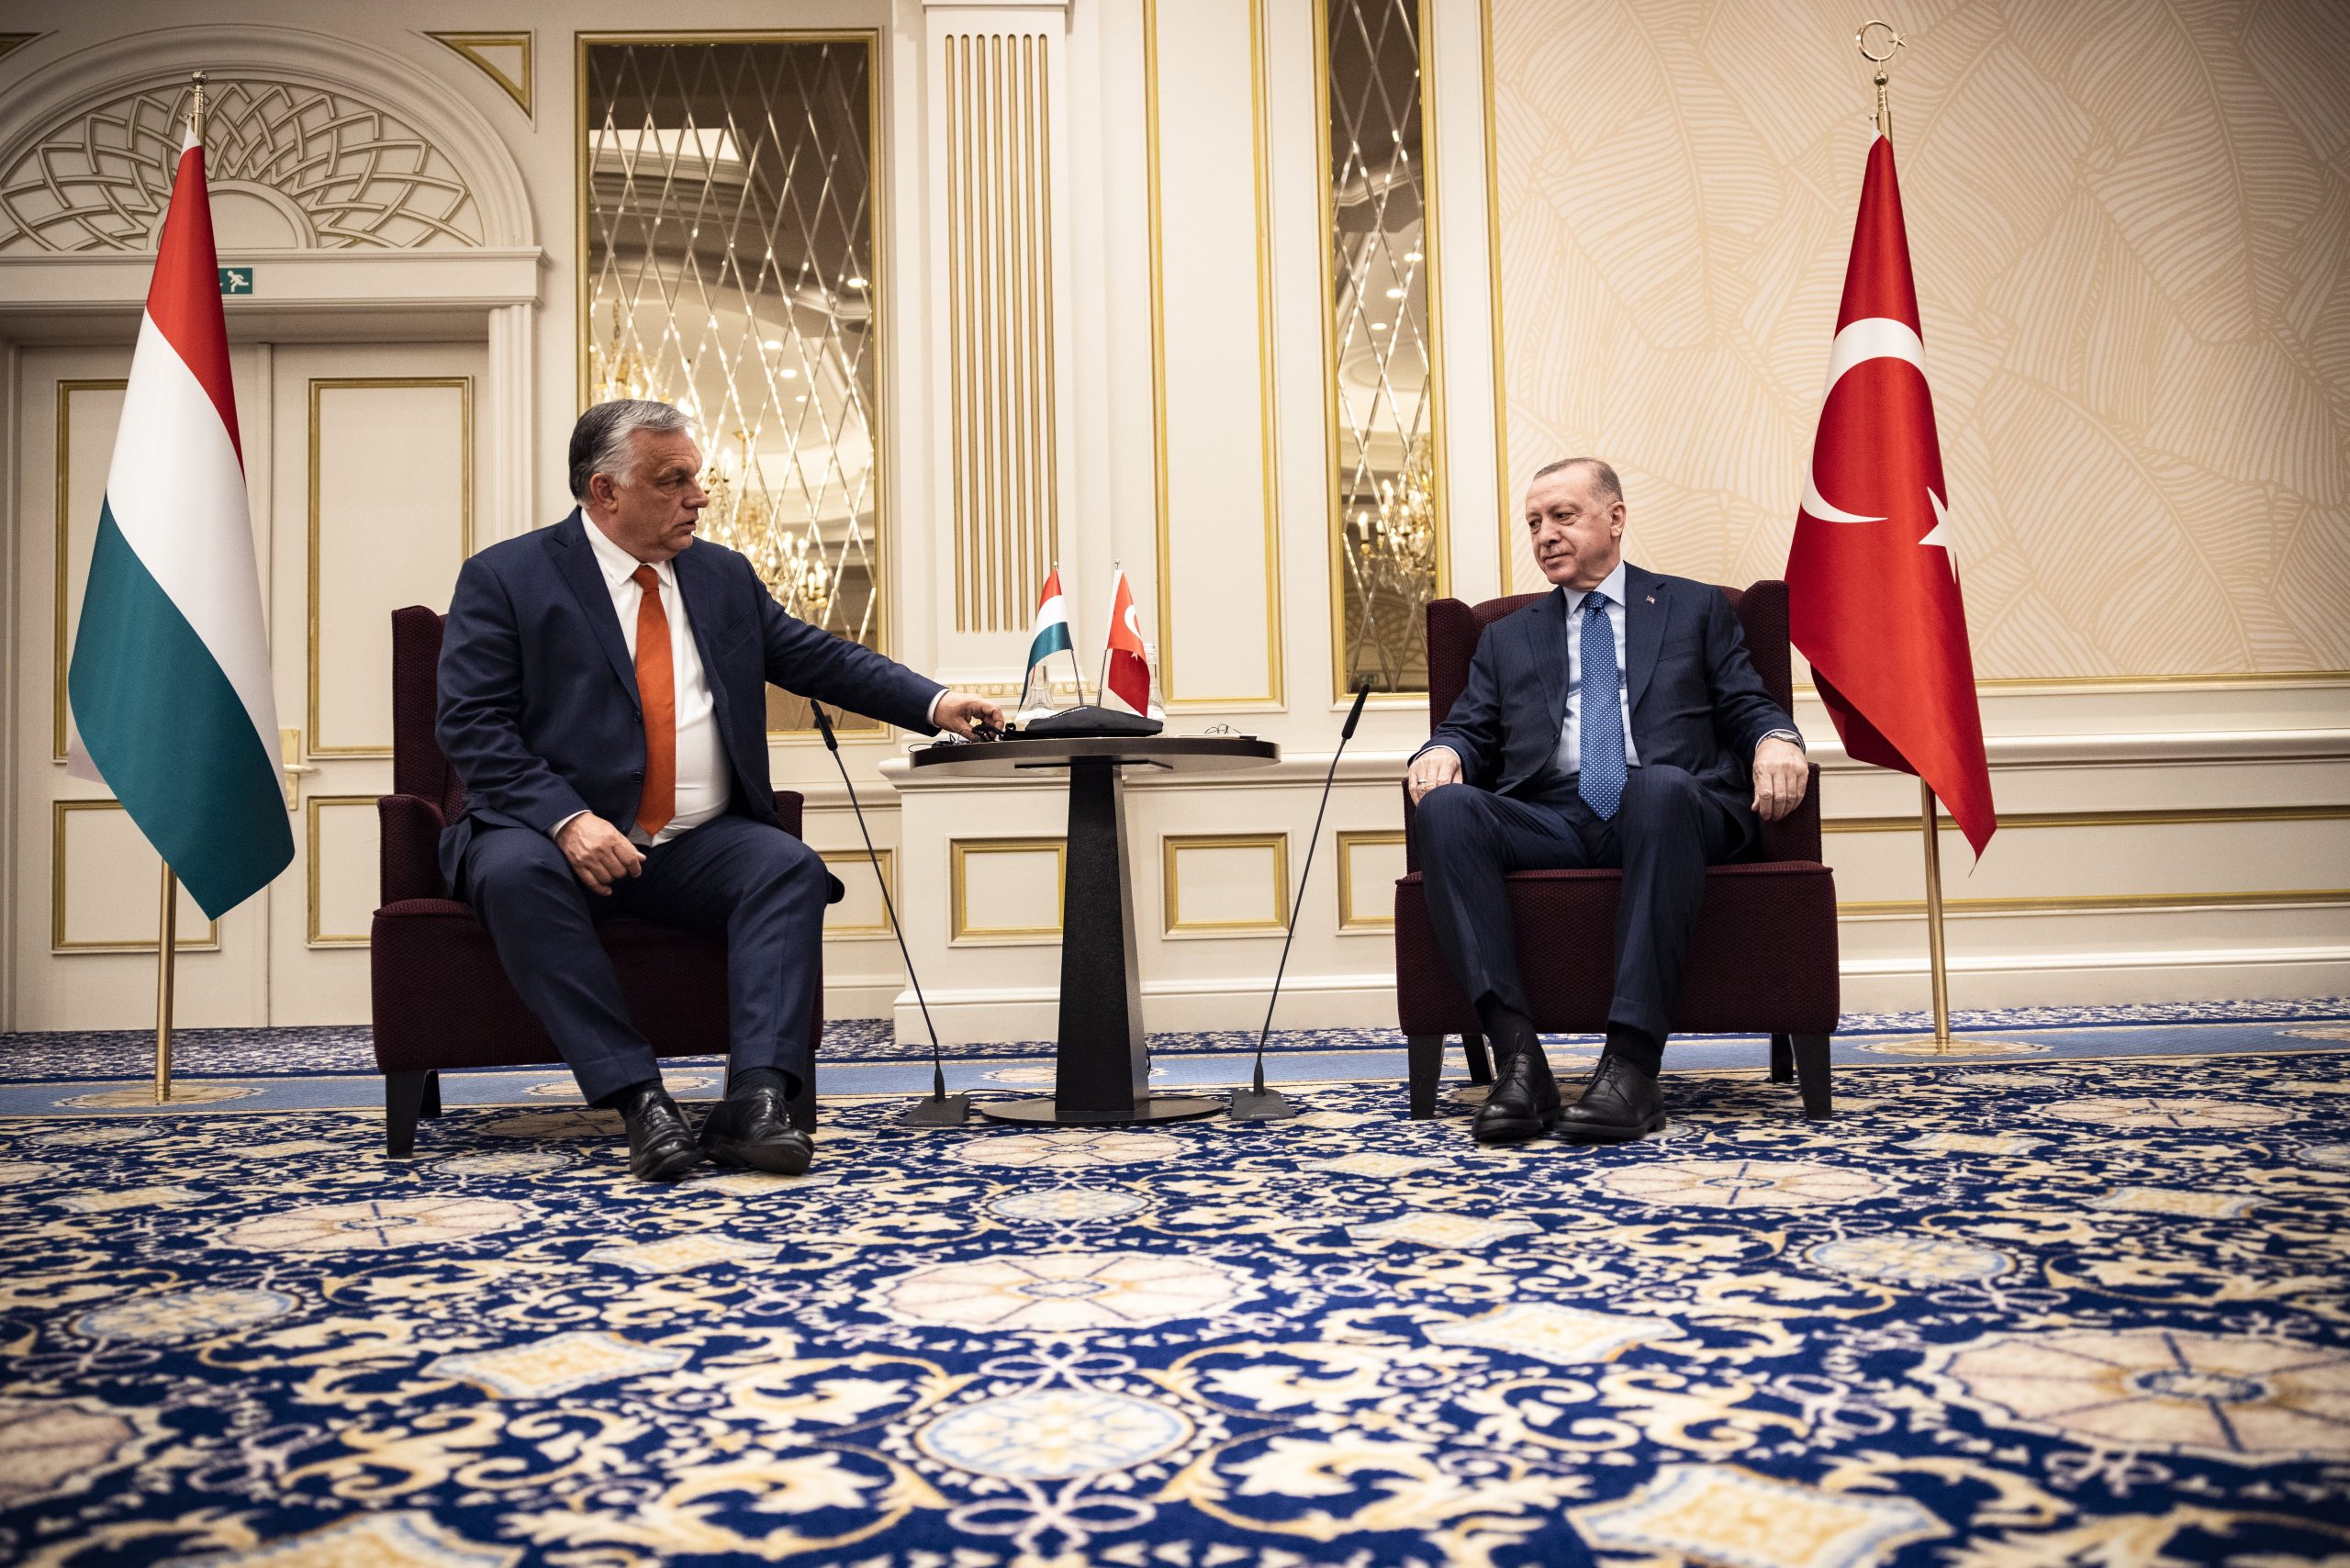 Turkey-Hungary Strategic Cooperation Council to Meet in Istanbul in November